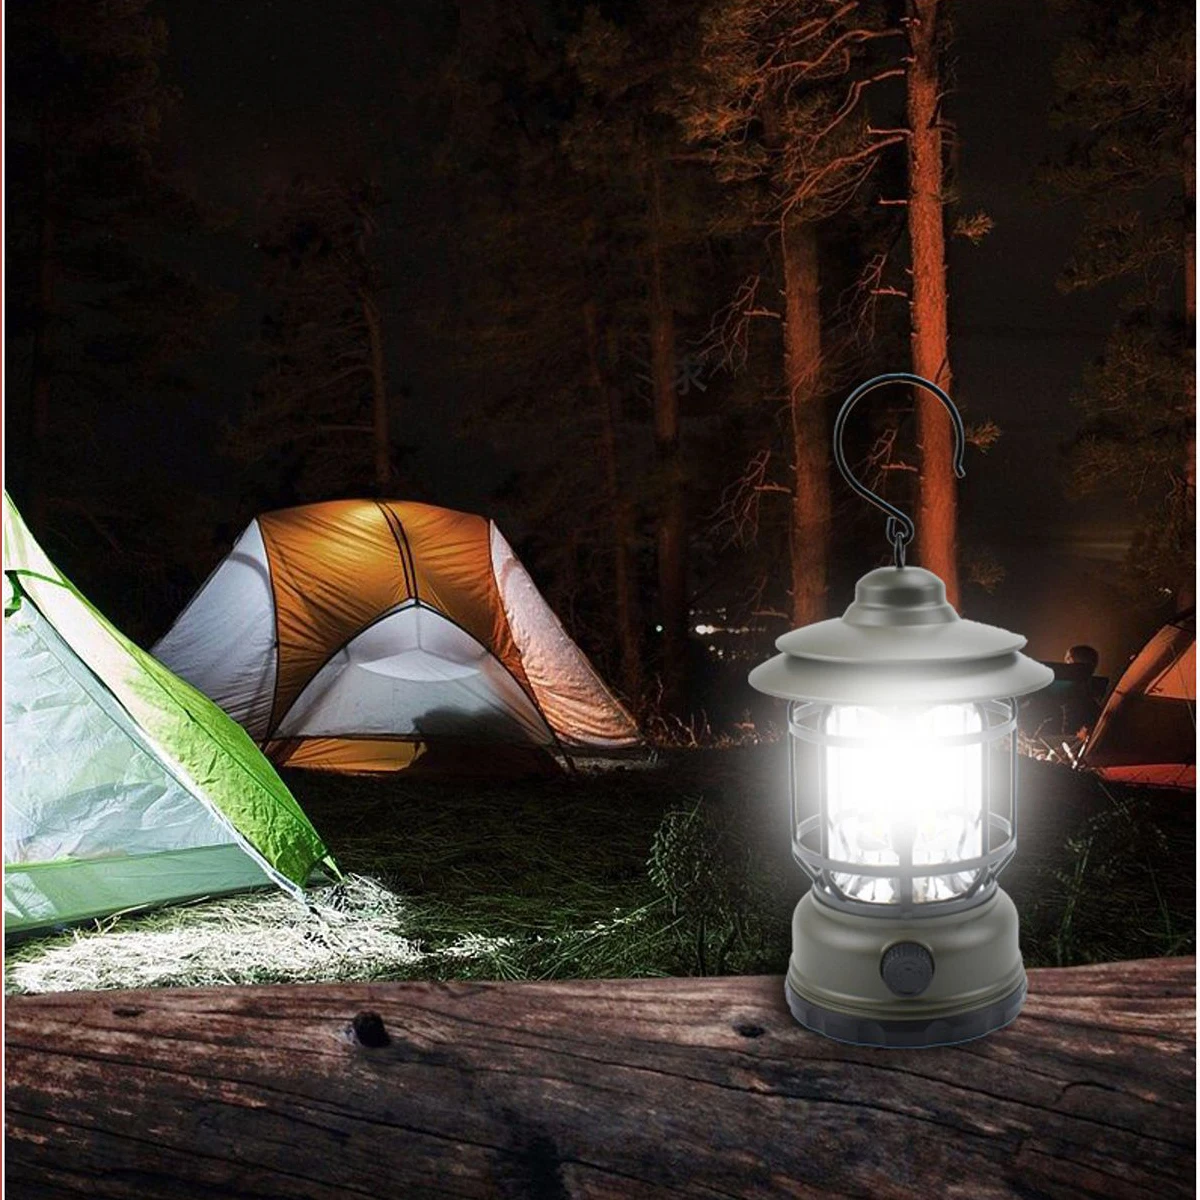 https://ae01.alicdn.com/kf/Scd92bd1246454ef09f3deb24e6ab2eccl/Outdoor-Portable-Waterproof-Camping-Light-TYPE-C-LED-Rechargeable-Hanging-Tent-light-Hanging-Camping-Lantern-Hand.jpg